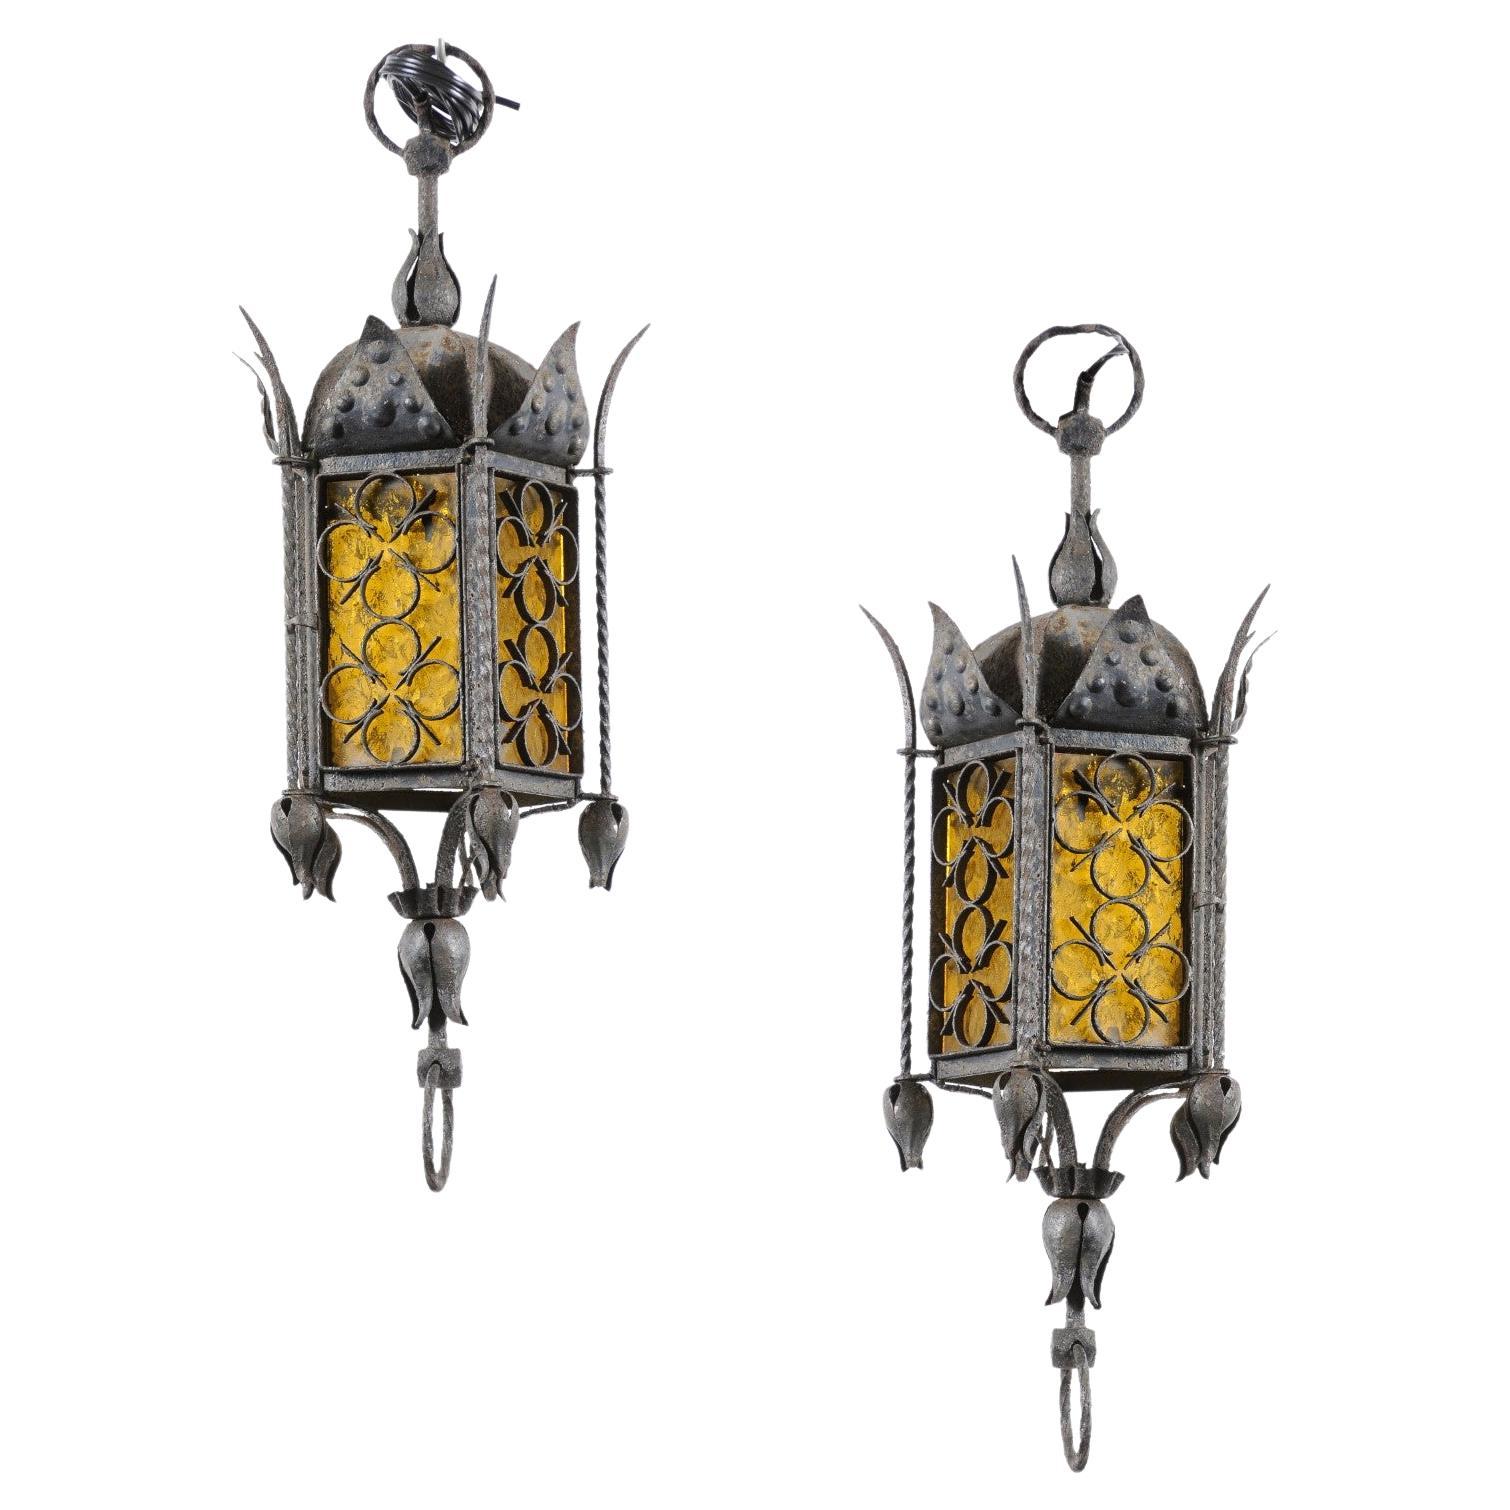 Wrought Iron Hanging Lanterns with Amber Glass, SET OF 3, PRICE PER EACH